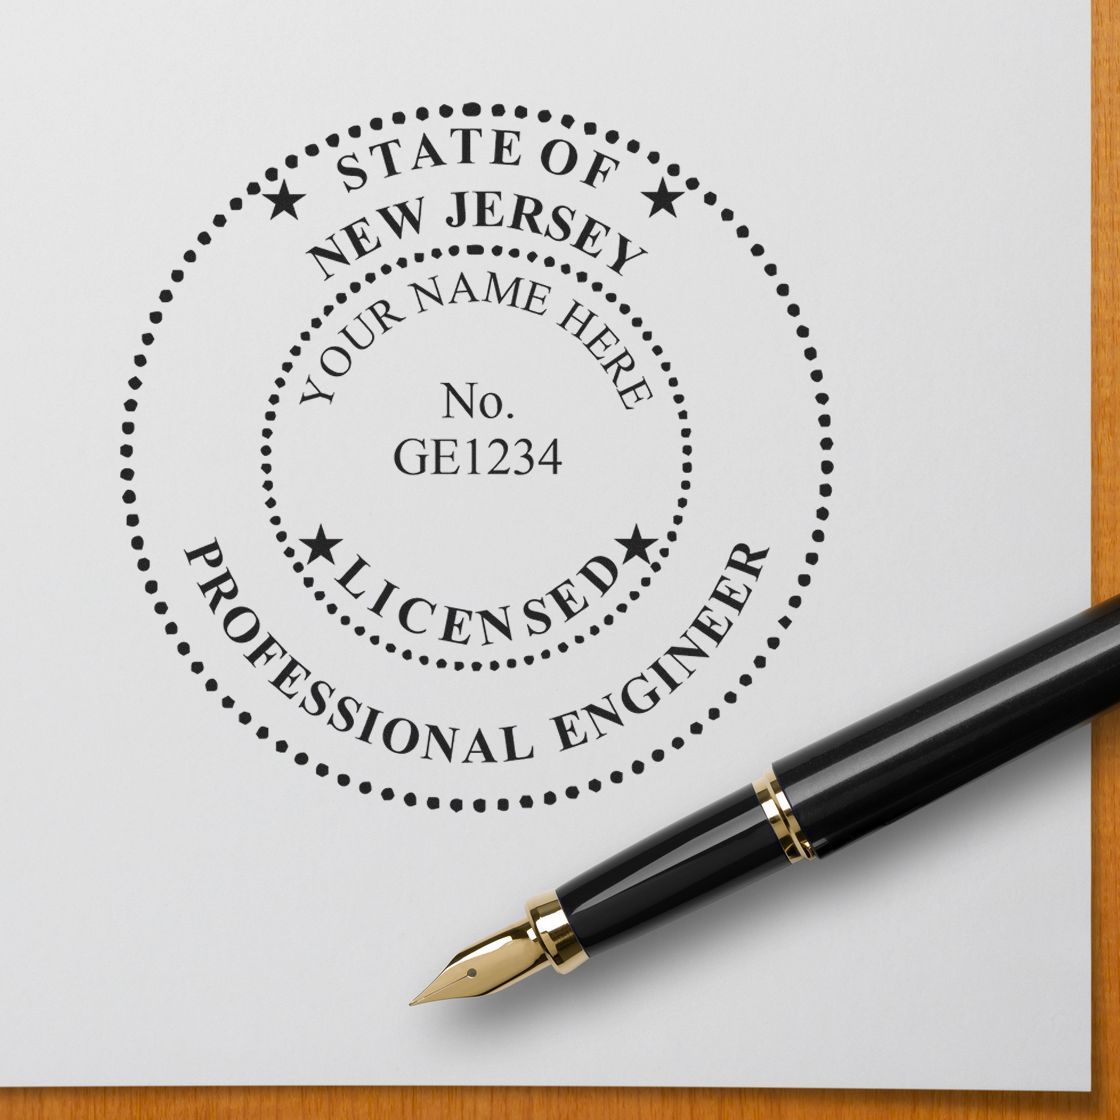 Another Example of a stamped impression of the New Jersey Professional Engineer Seal Stamp on a piece of office paper.